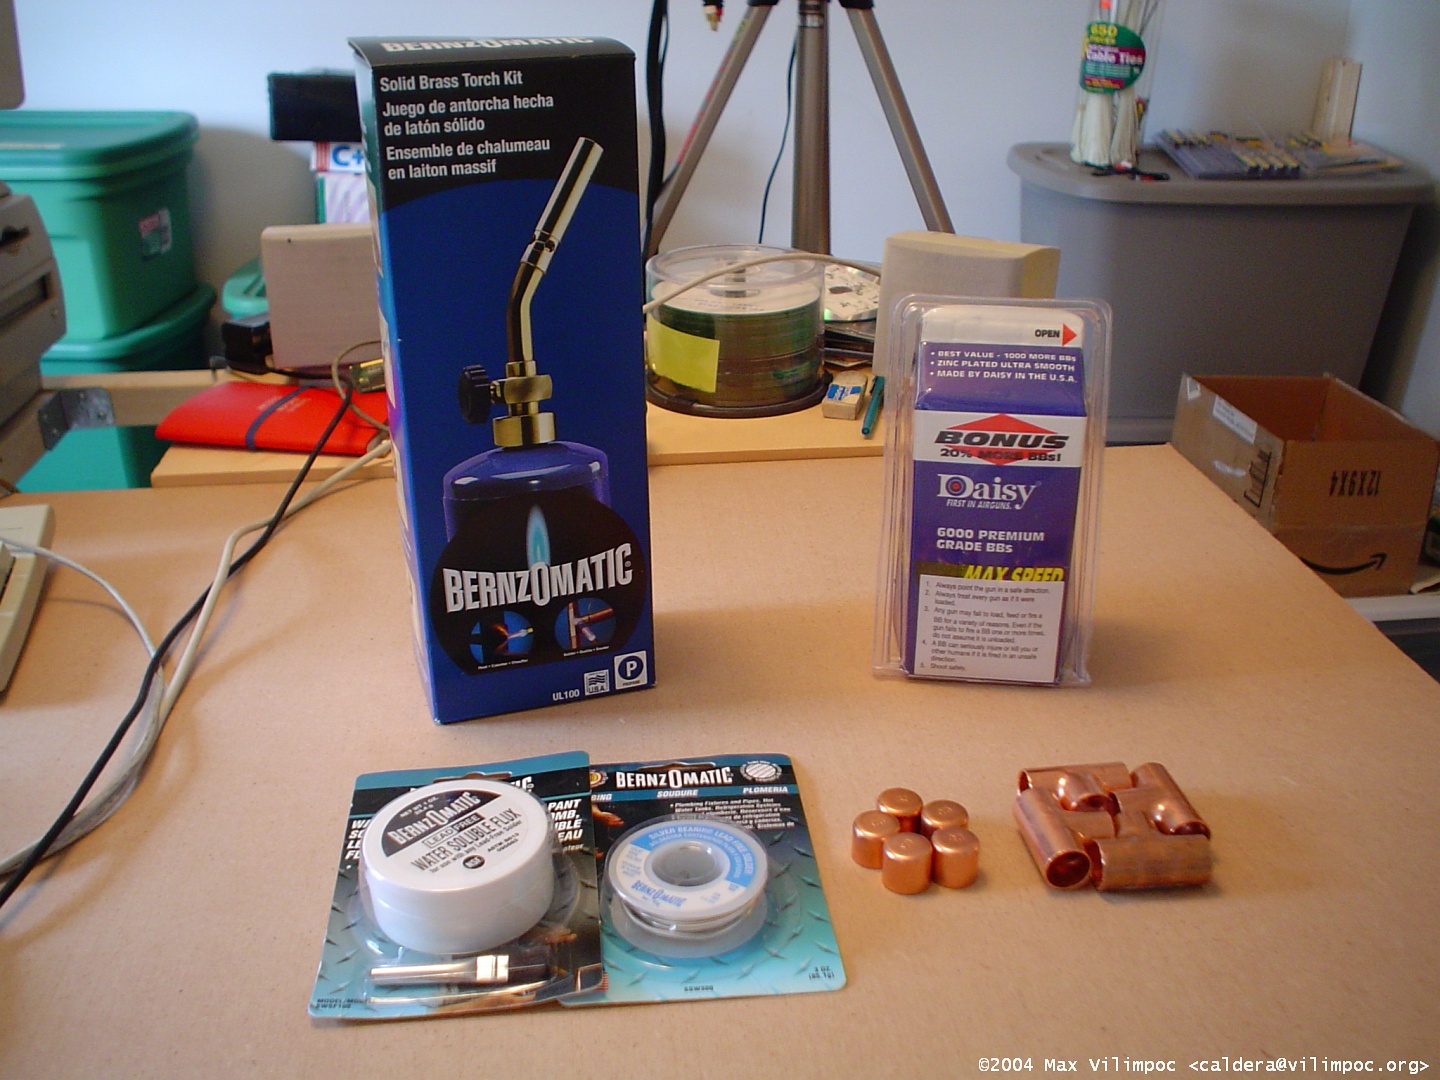 A Bernzomatic propane torch, solder flux, solder, and copper joints and endcaps